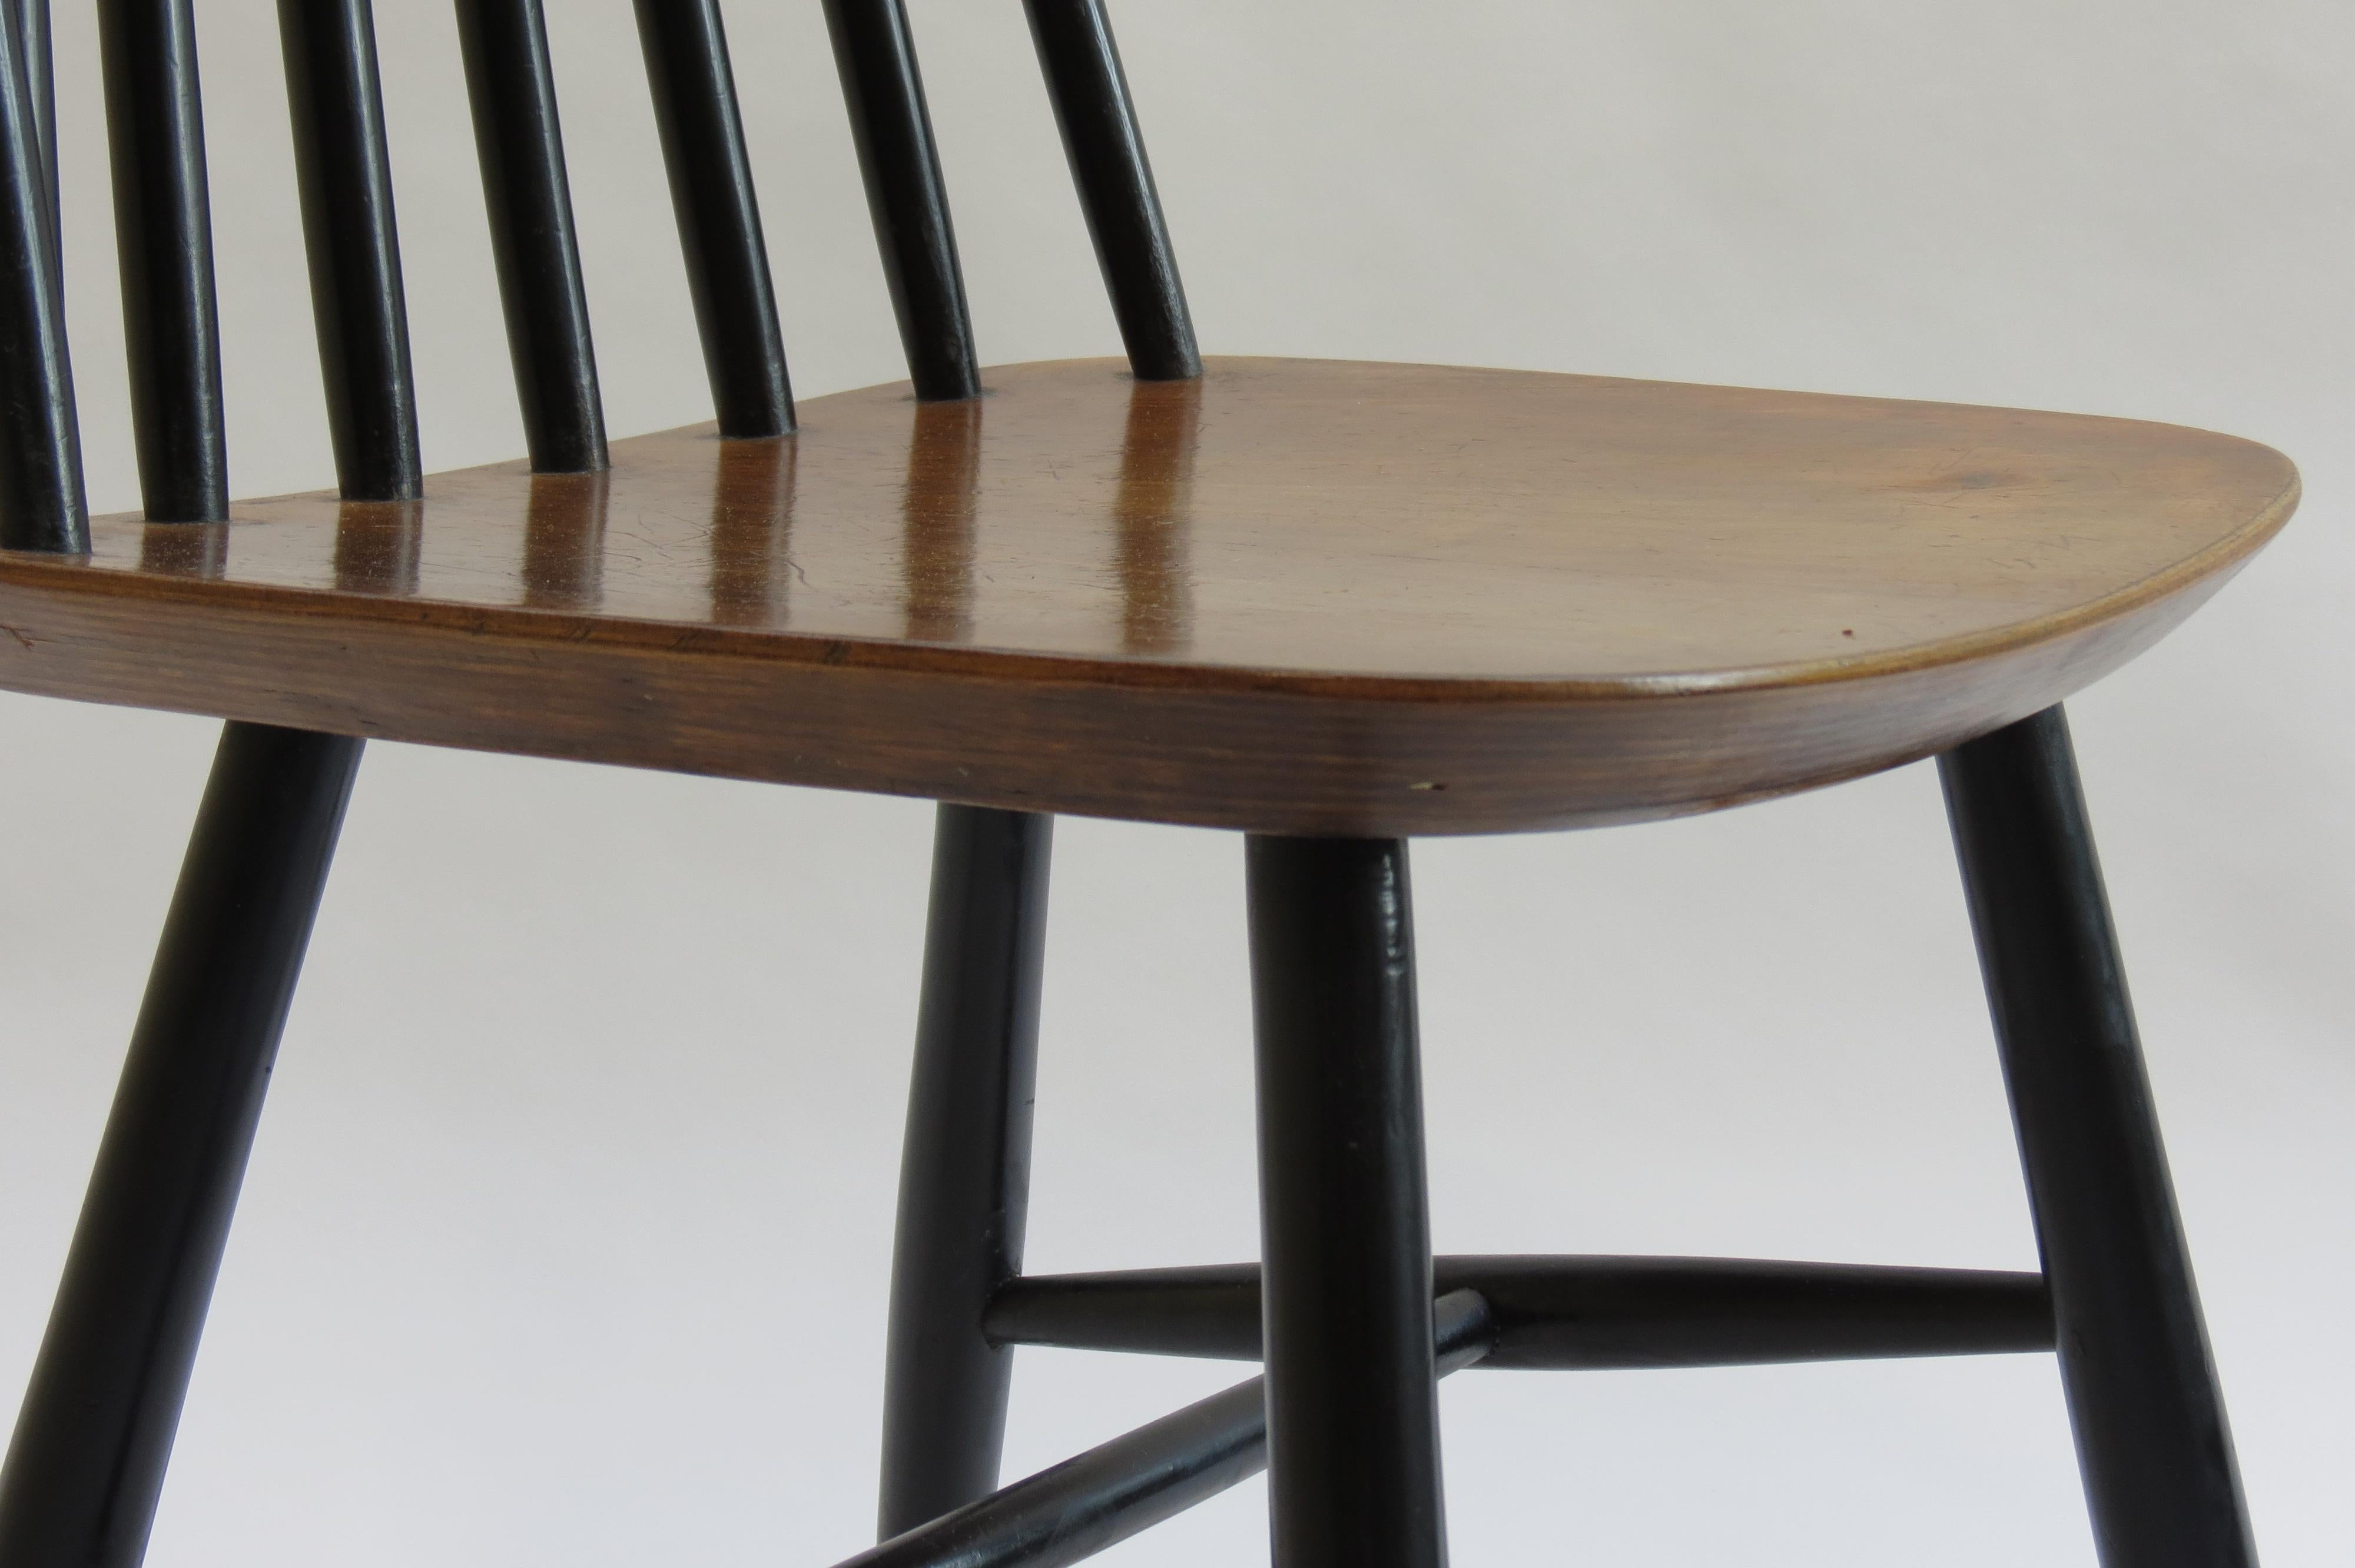 The 1950s Black and Walnut Dining Chair in the Style of Imari Tapiovaara (Maschinell gefertigt) im Angebot